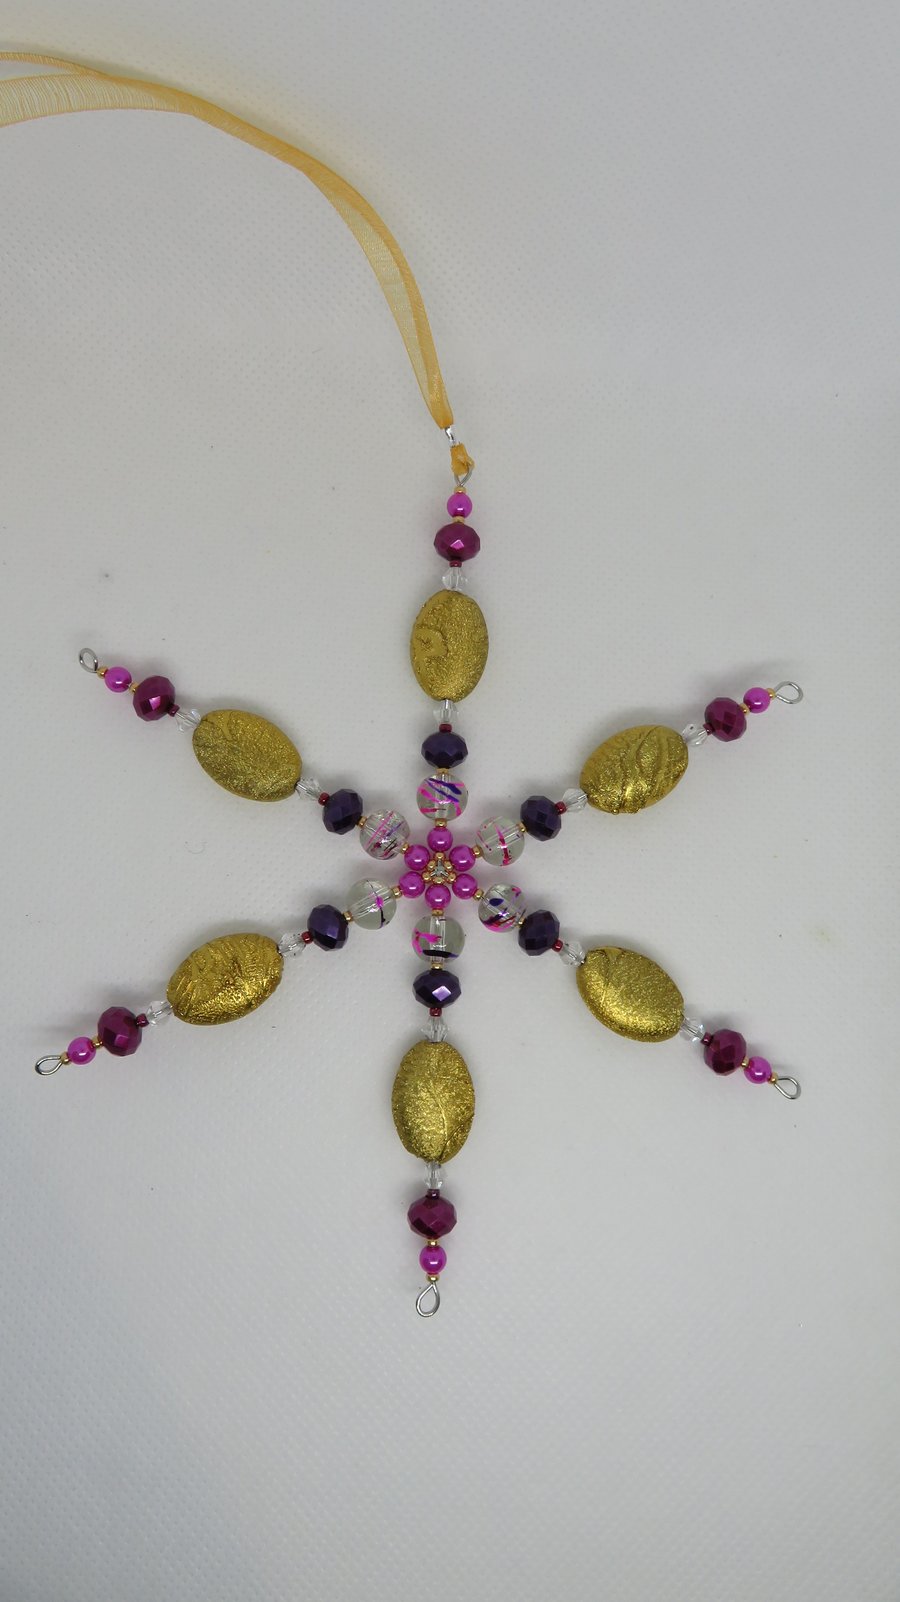 Large gold and purple snowflake